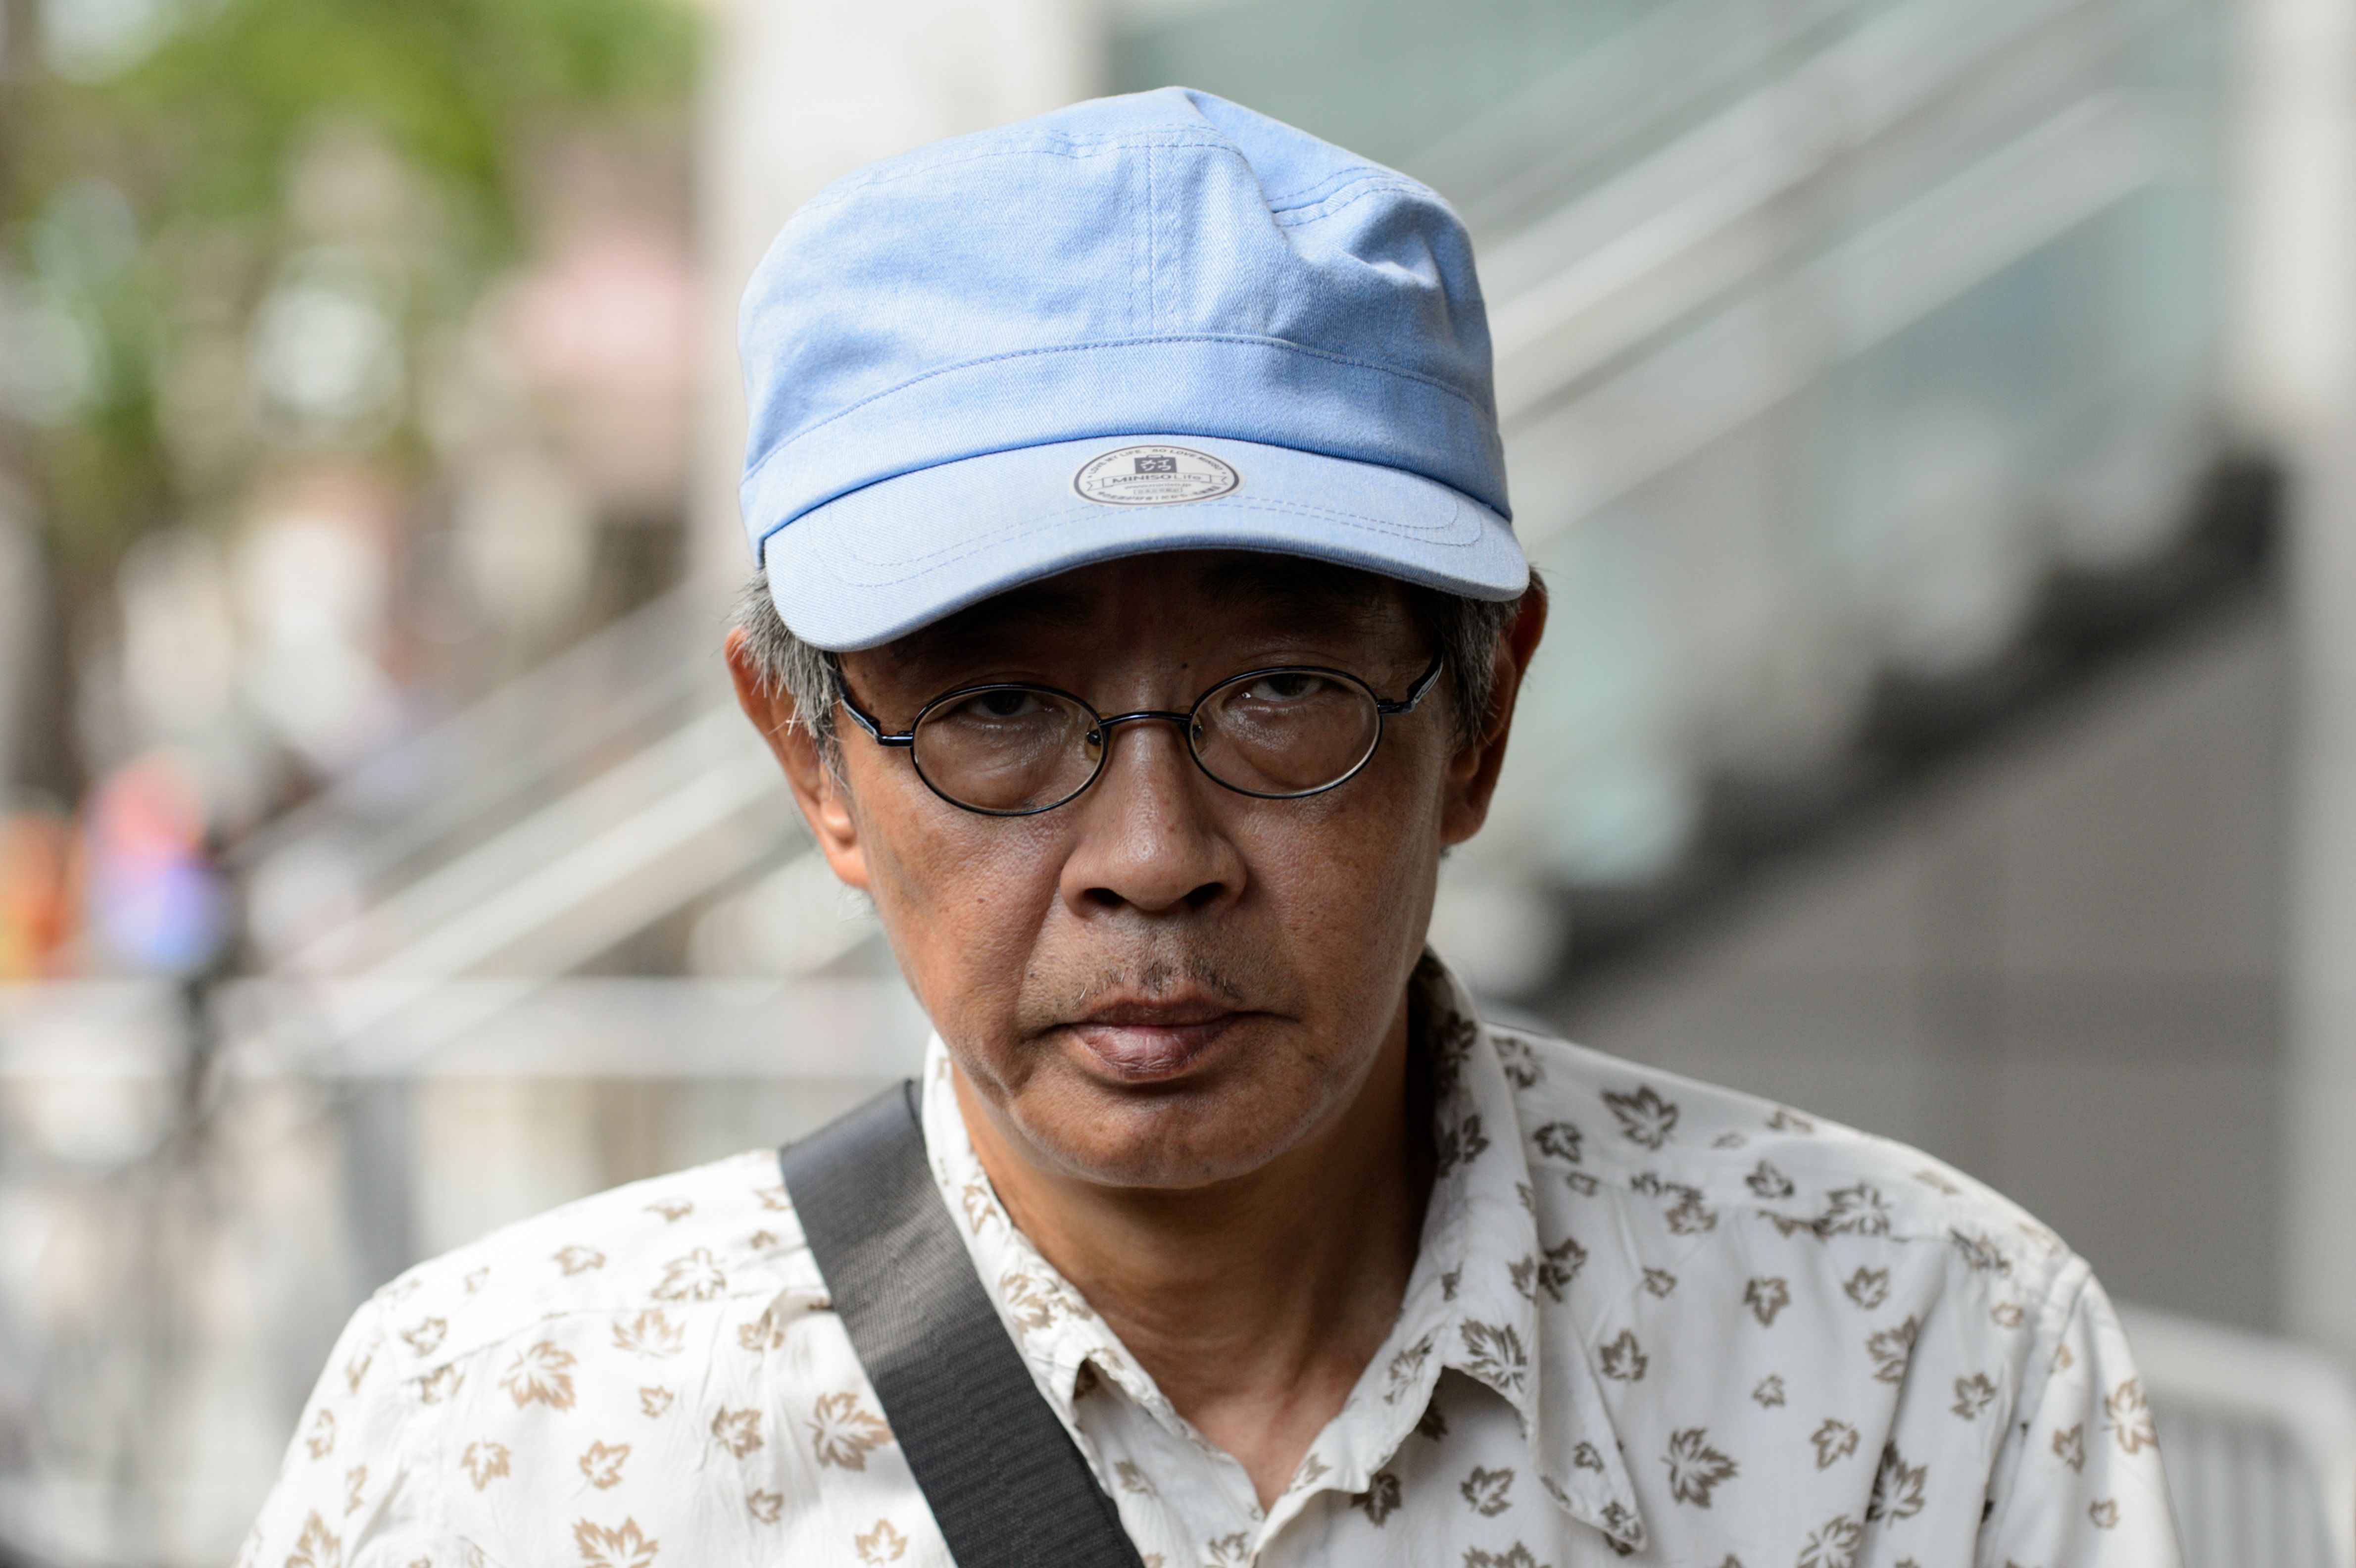 Hong Kong bookseller Lam Wing-kee at Wanchai police station in Hong Kong on June 27, 2016. (Anthony Wallace—AFP/Getty Images)